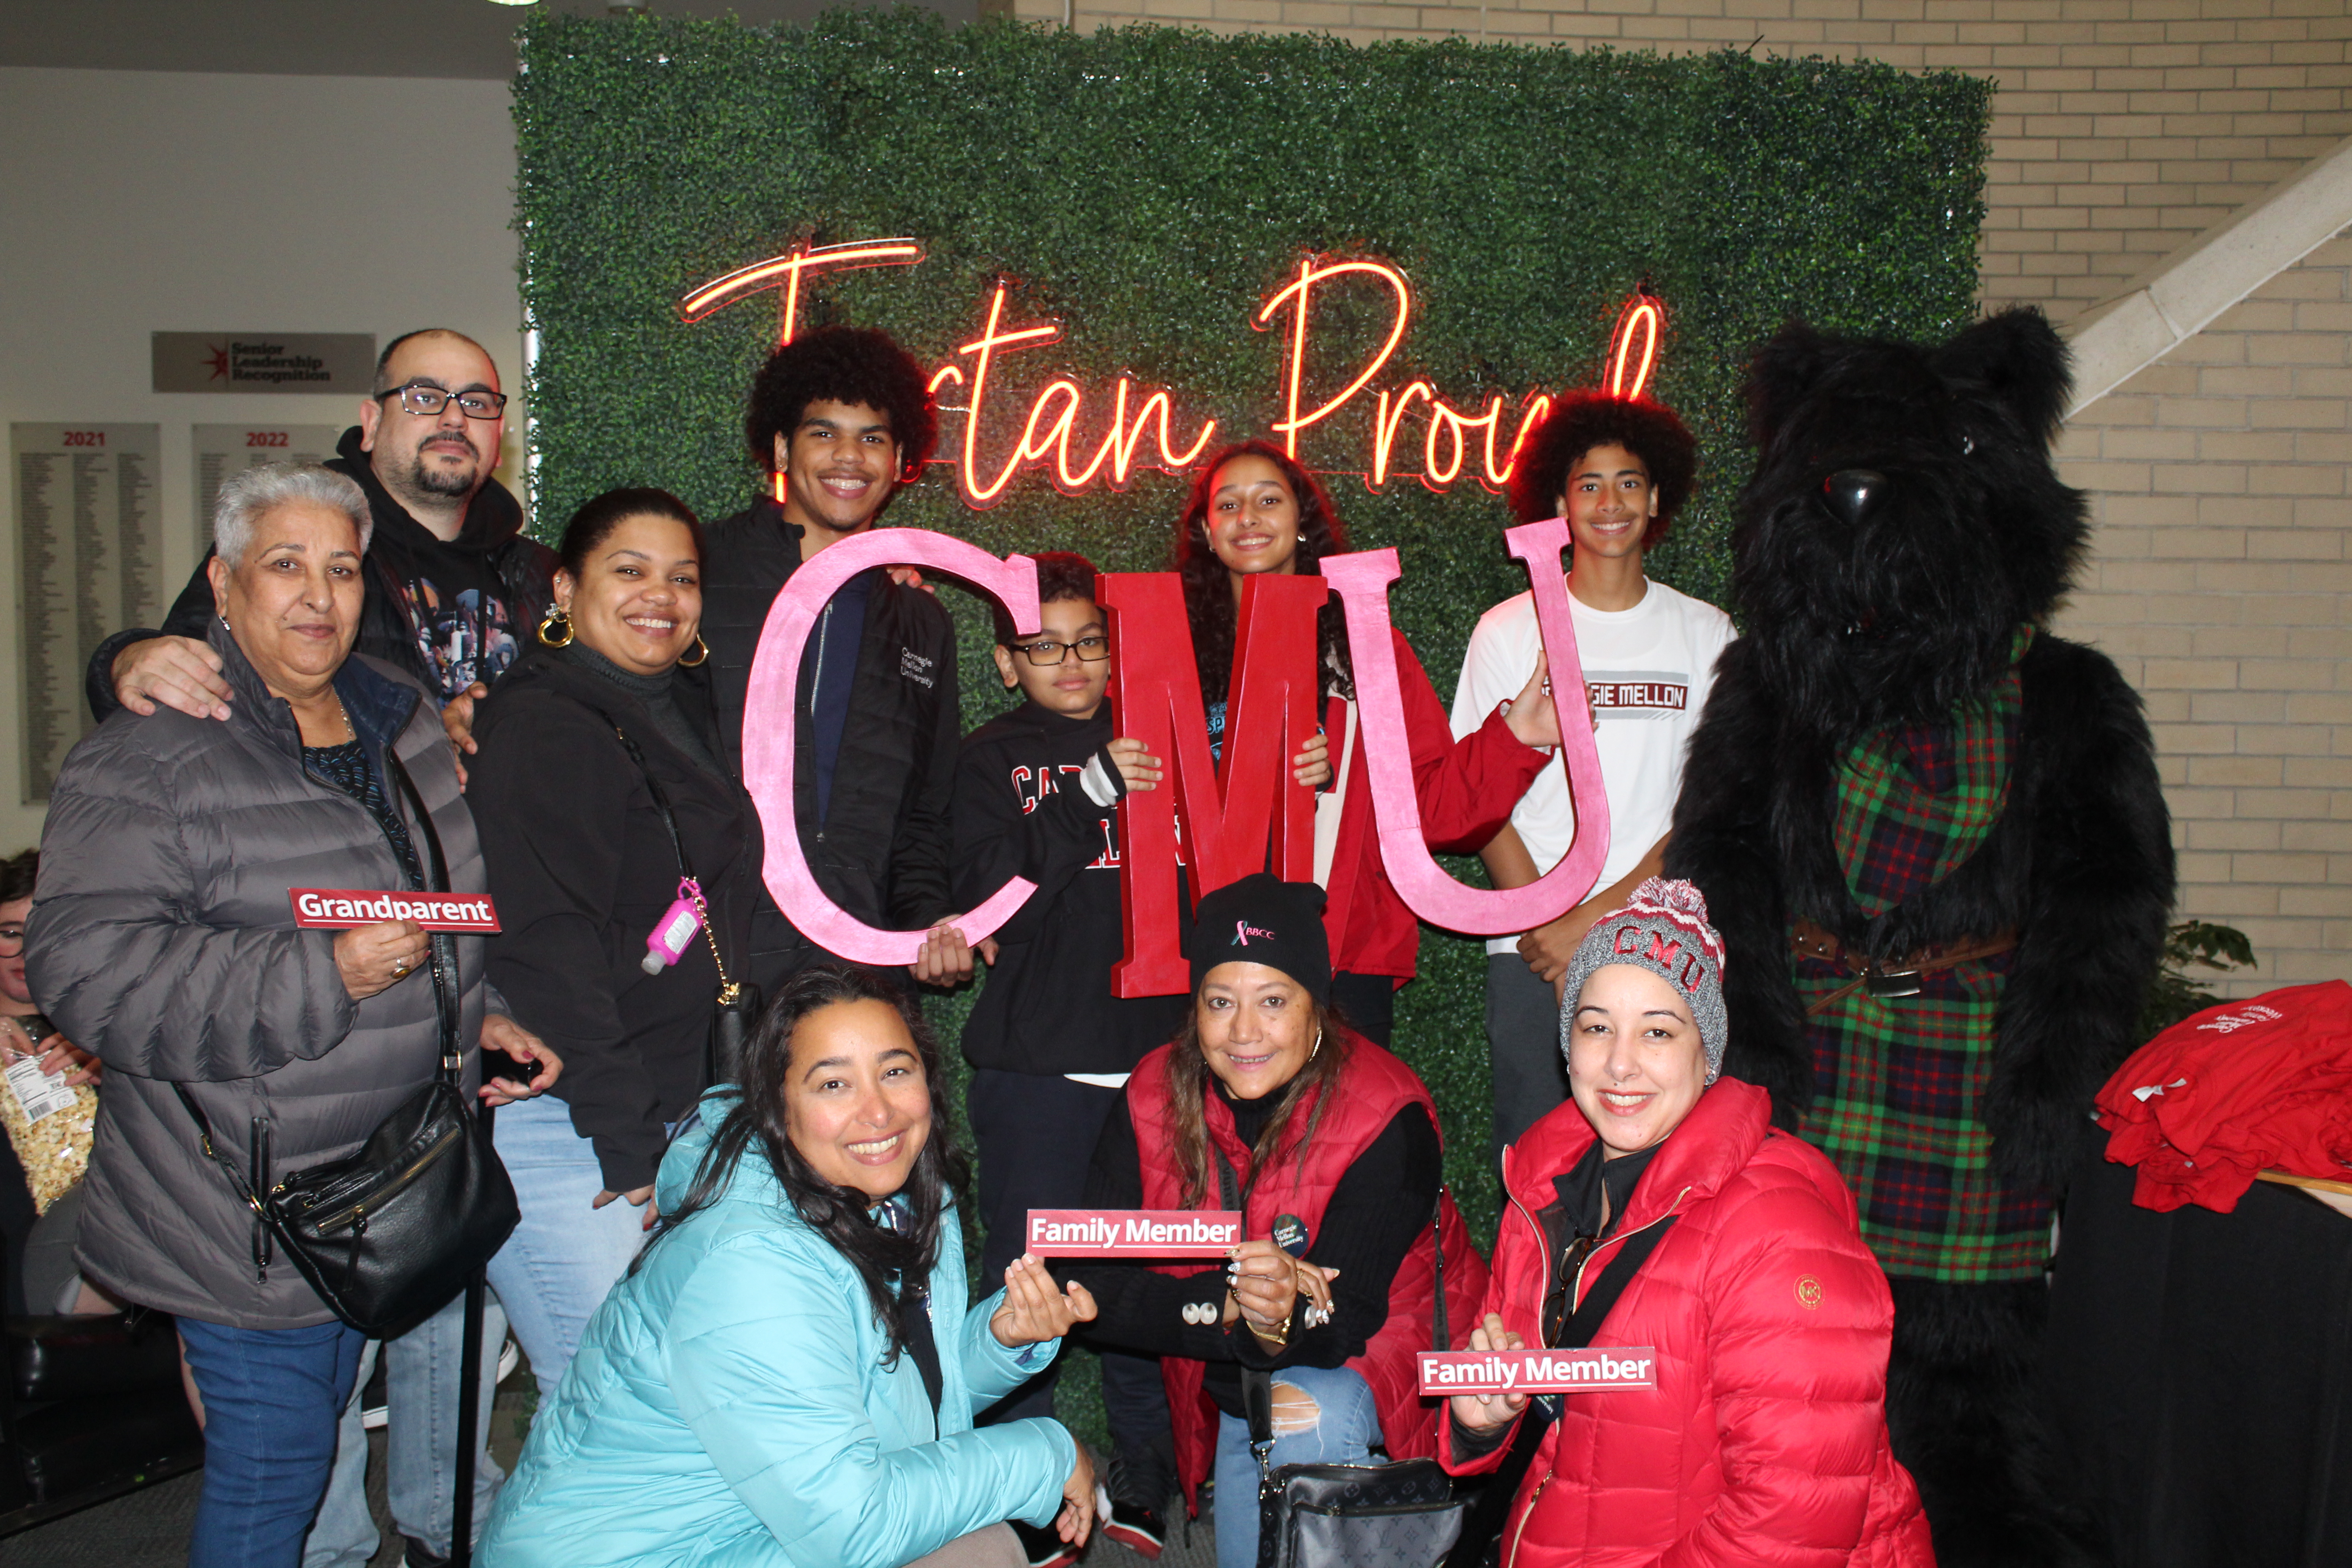 a group of CMU family members standing in front of a Tartan Proud sign